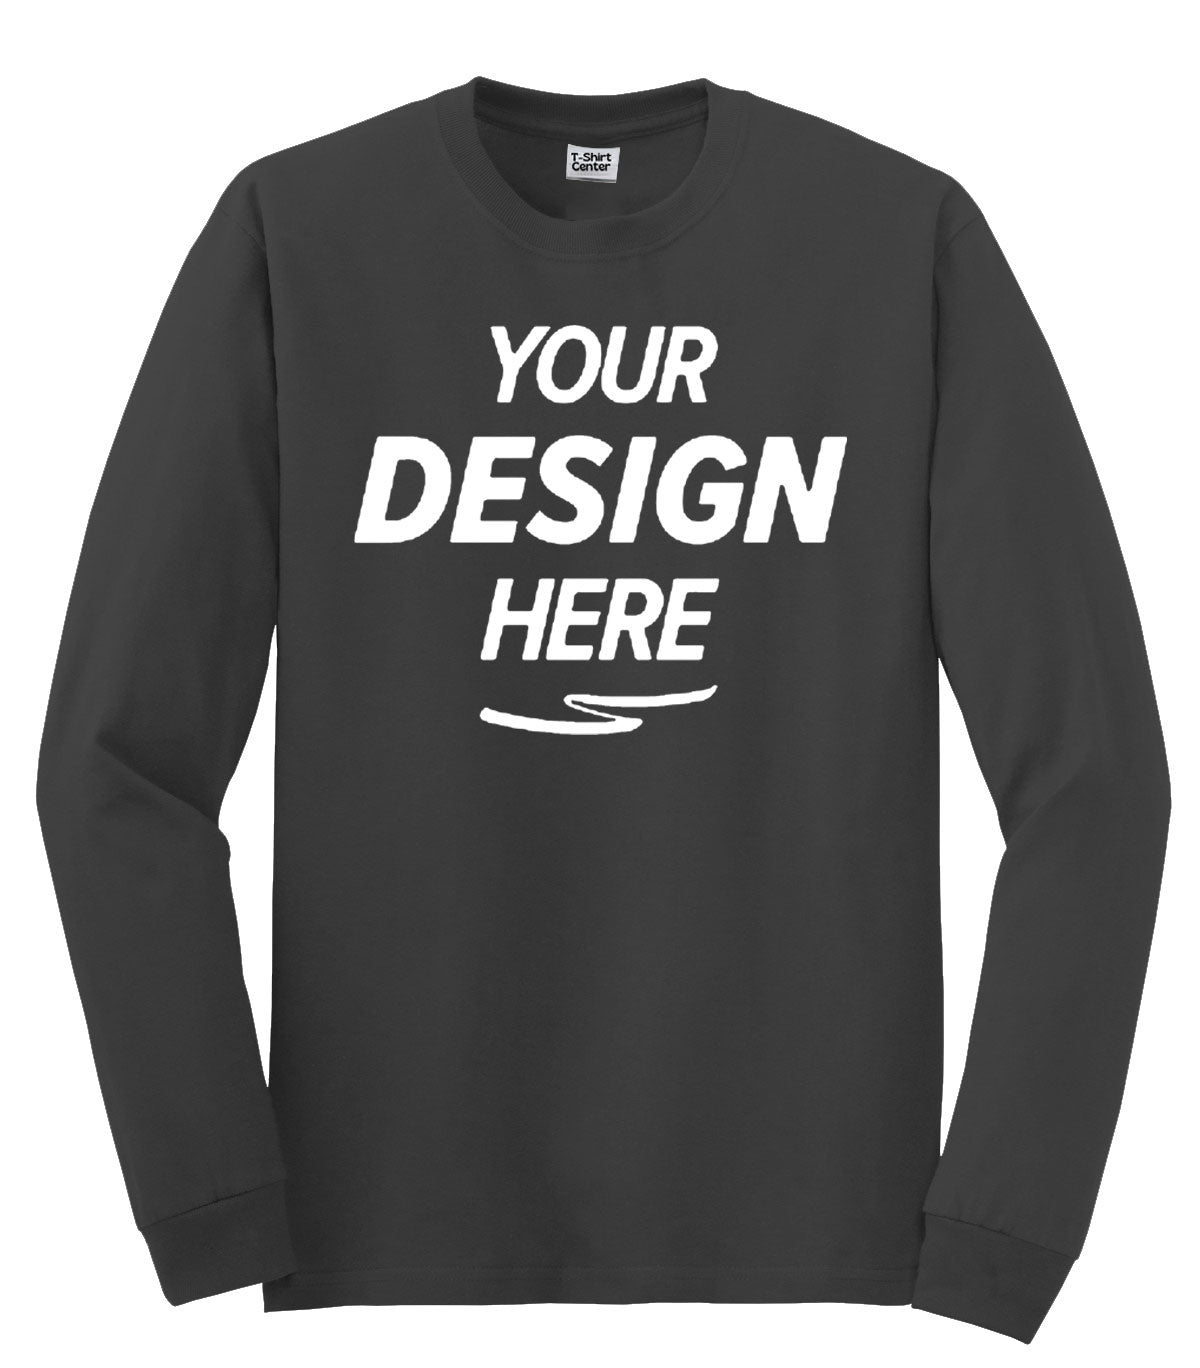 25  Heavy Cotton Long Sleeves ONLY $399 + Free Shipping